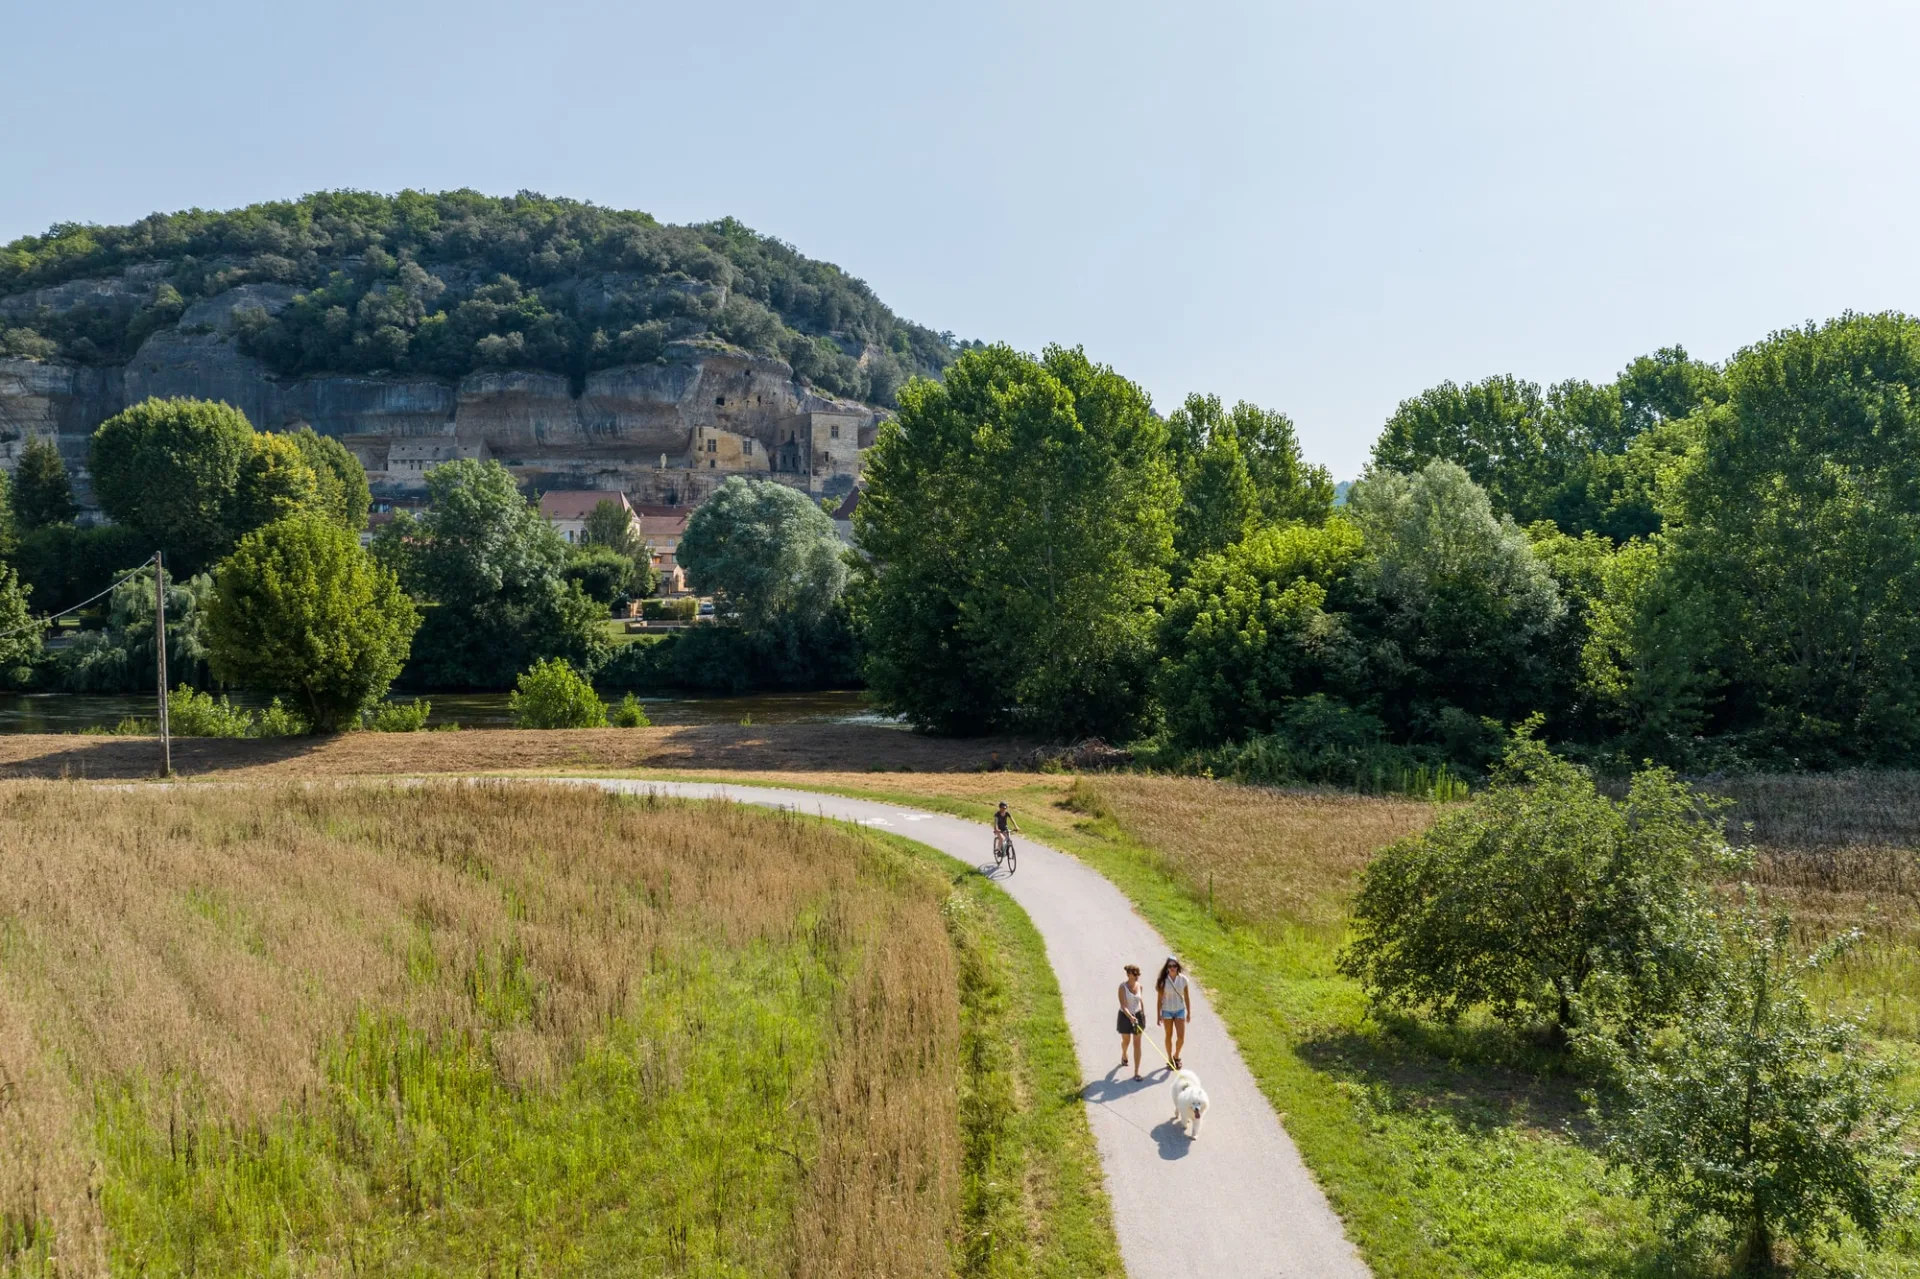 Hikers and mountain bikers on the Vézère Valley greenway in the Dordogne